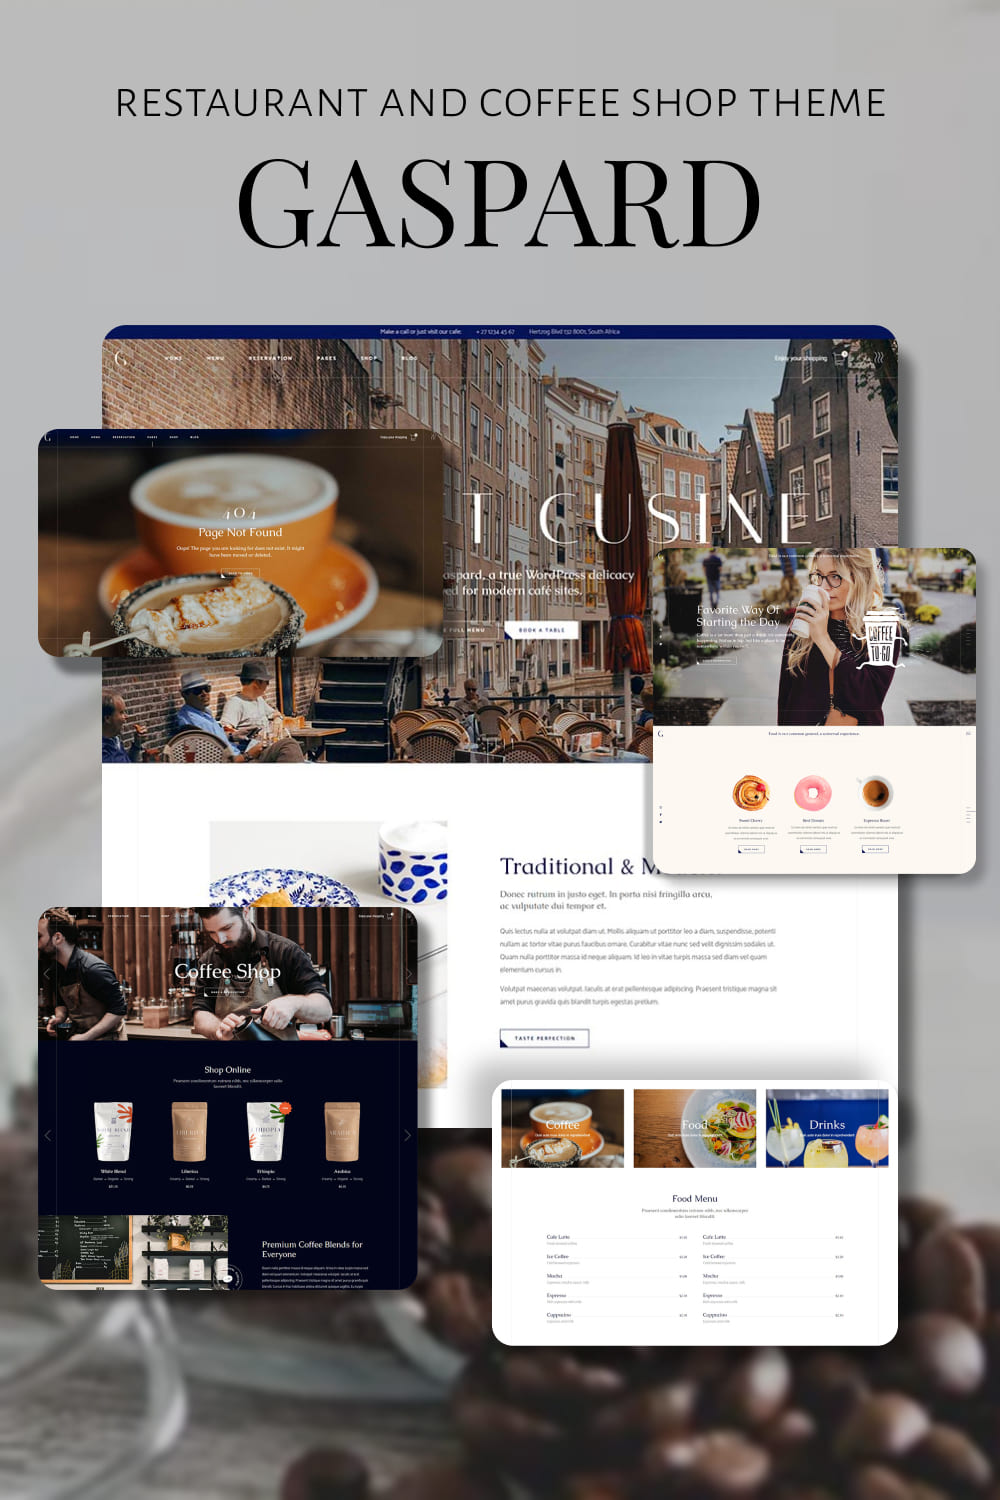 A set of colorful pages of the restaurant theme wordpress template.